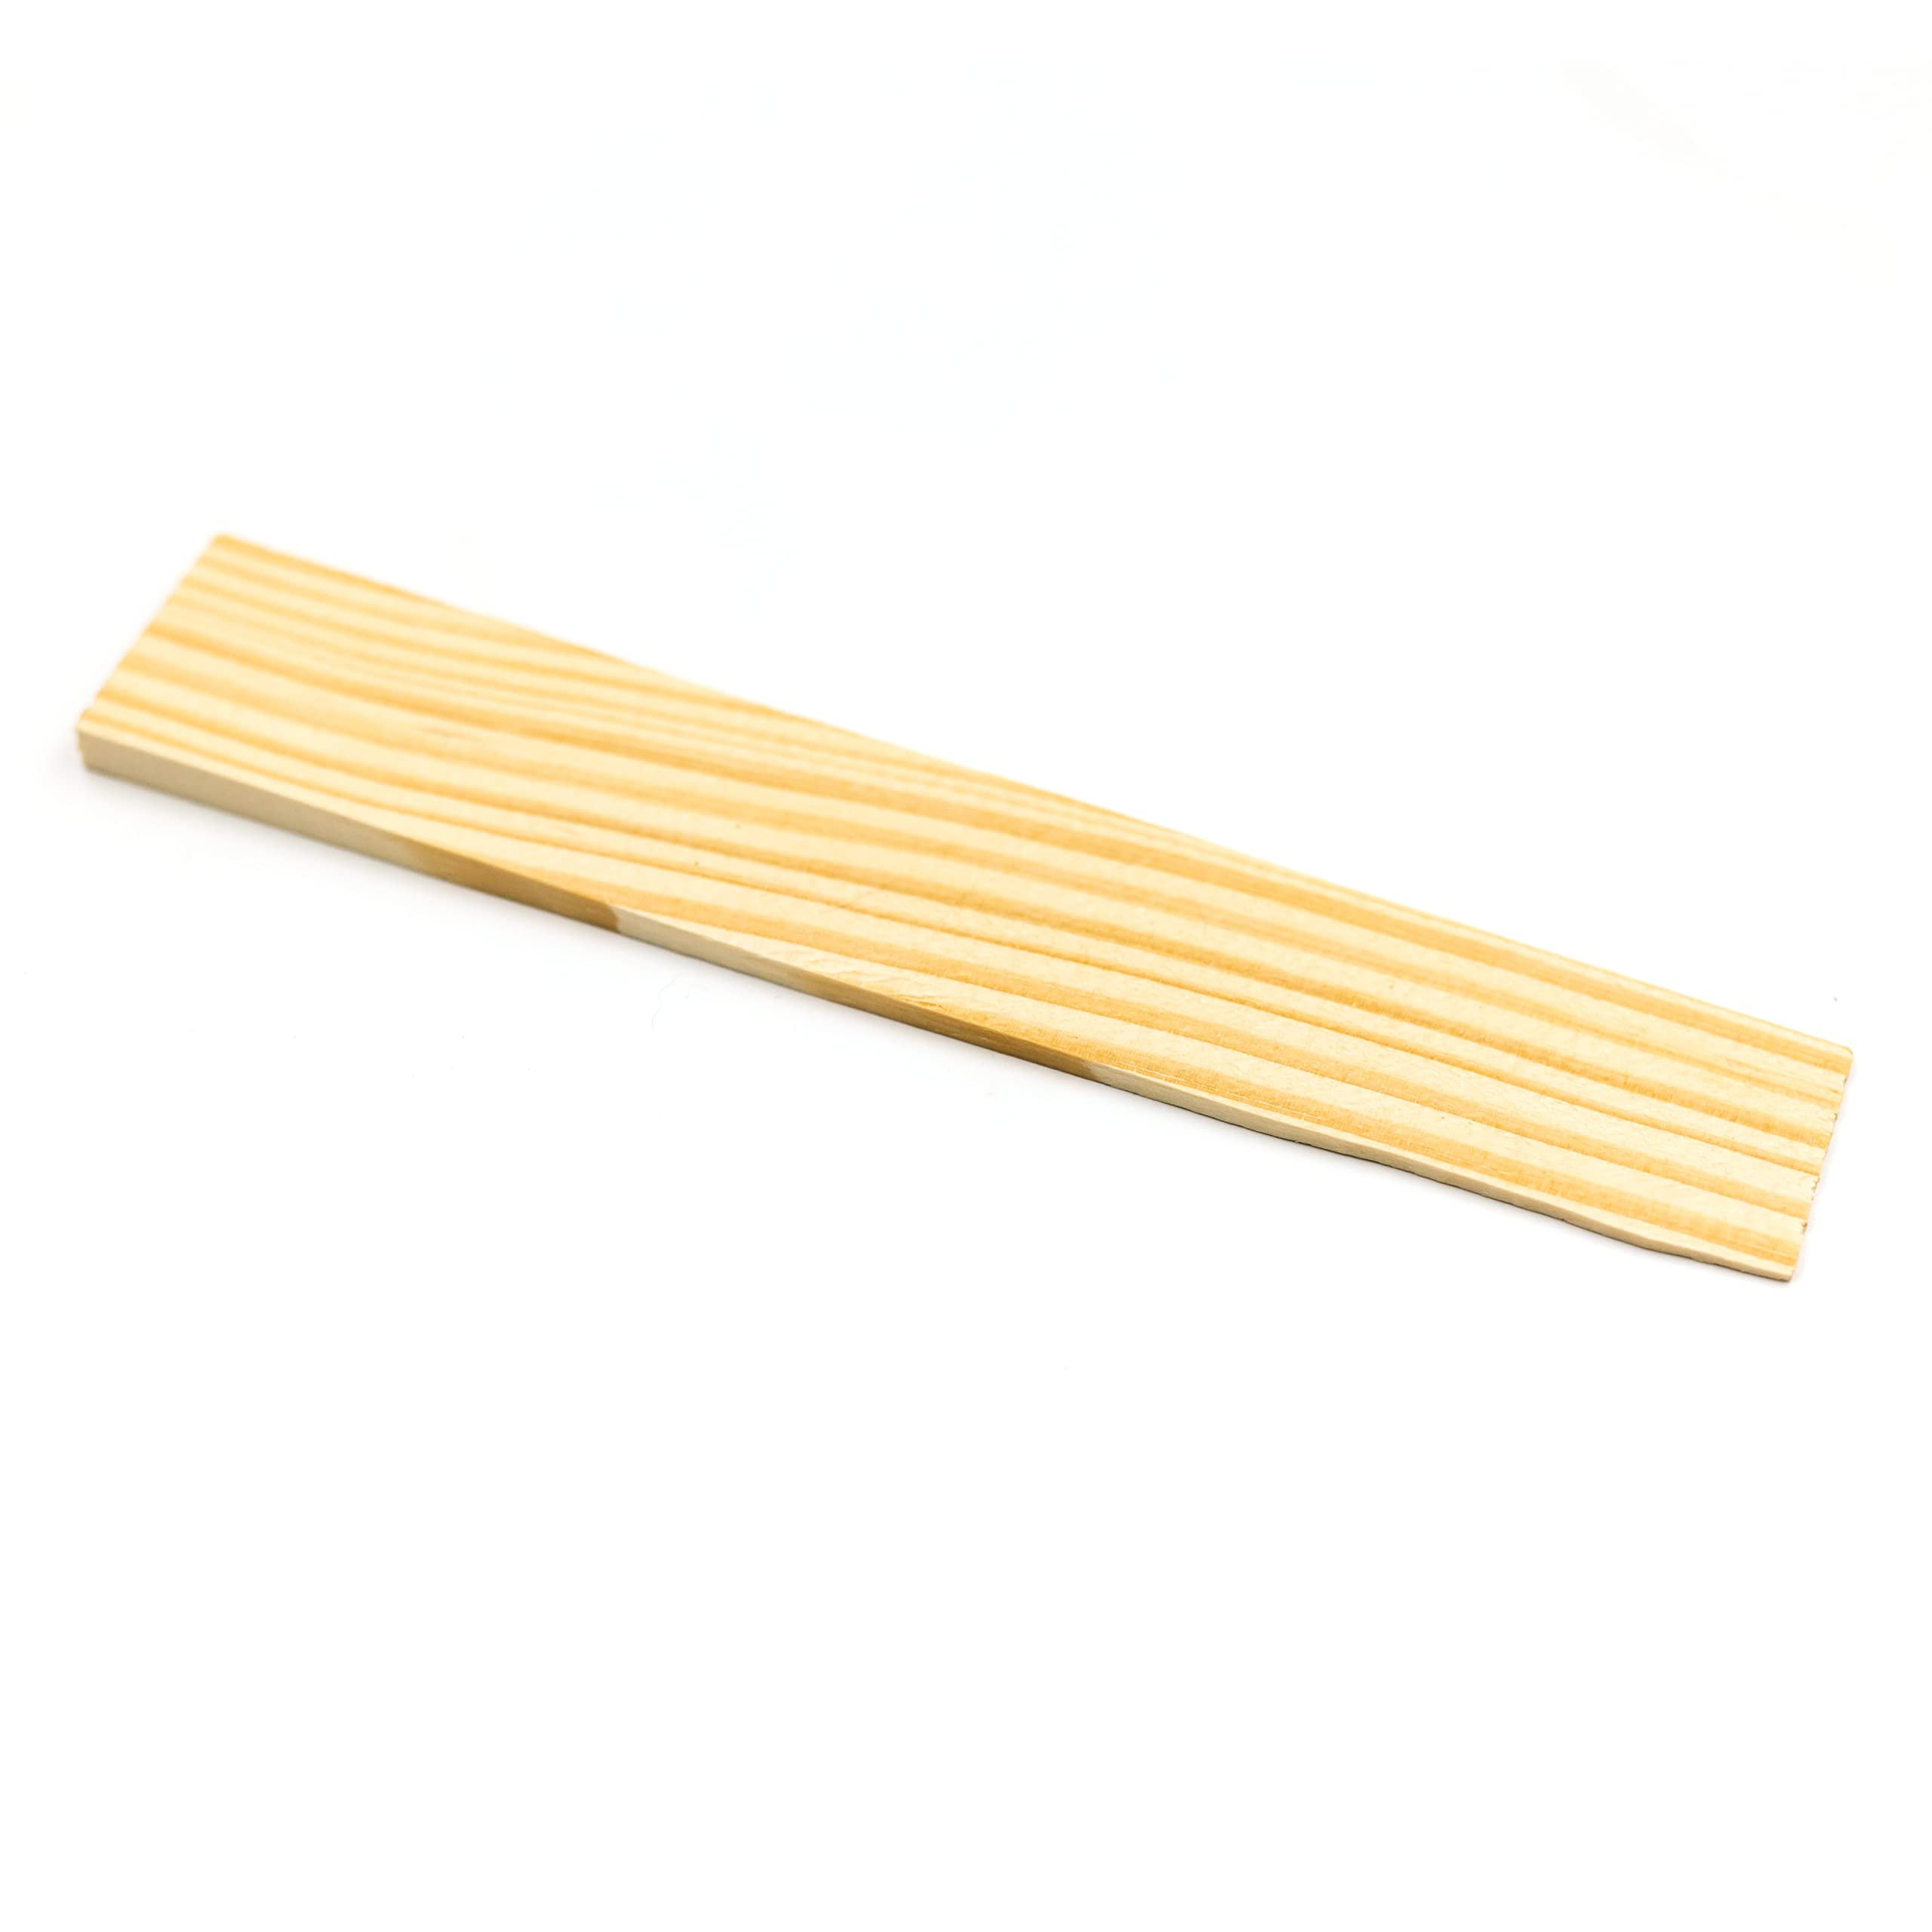 Glazelock WS02IN Wood Shims, 8 x 1-1/4 x 3/8 (Pack of 84)